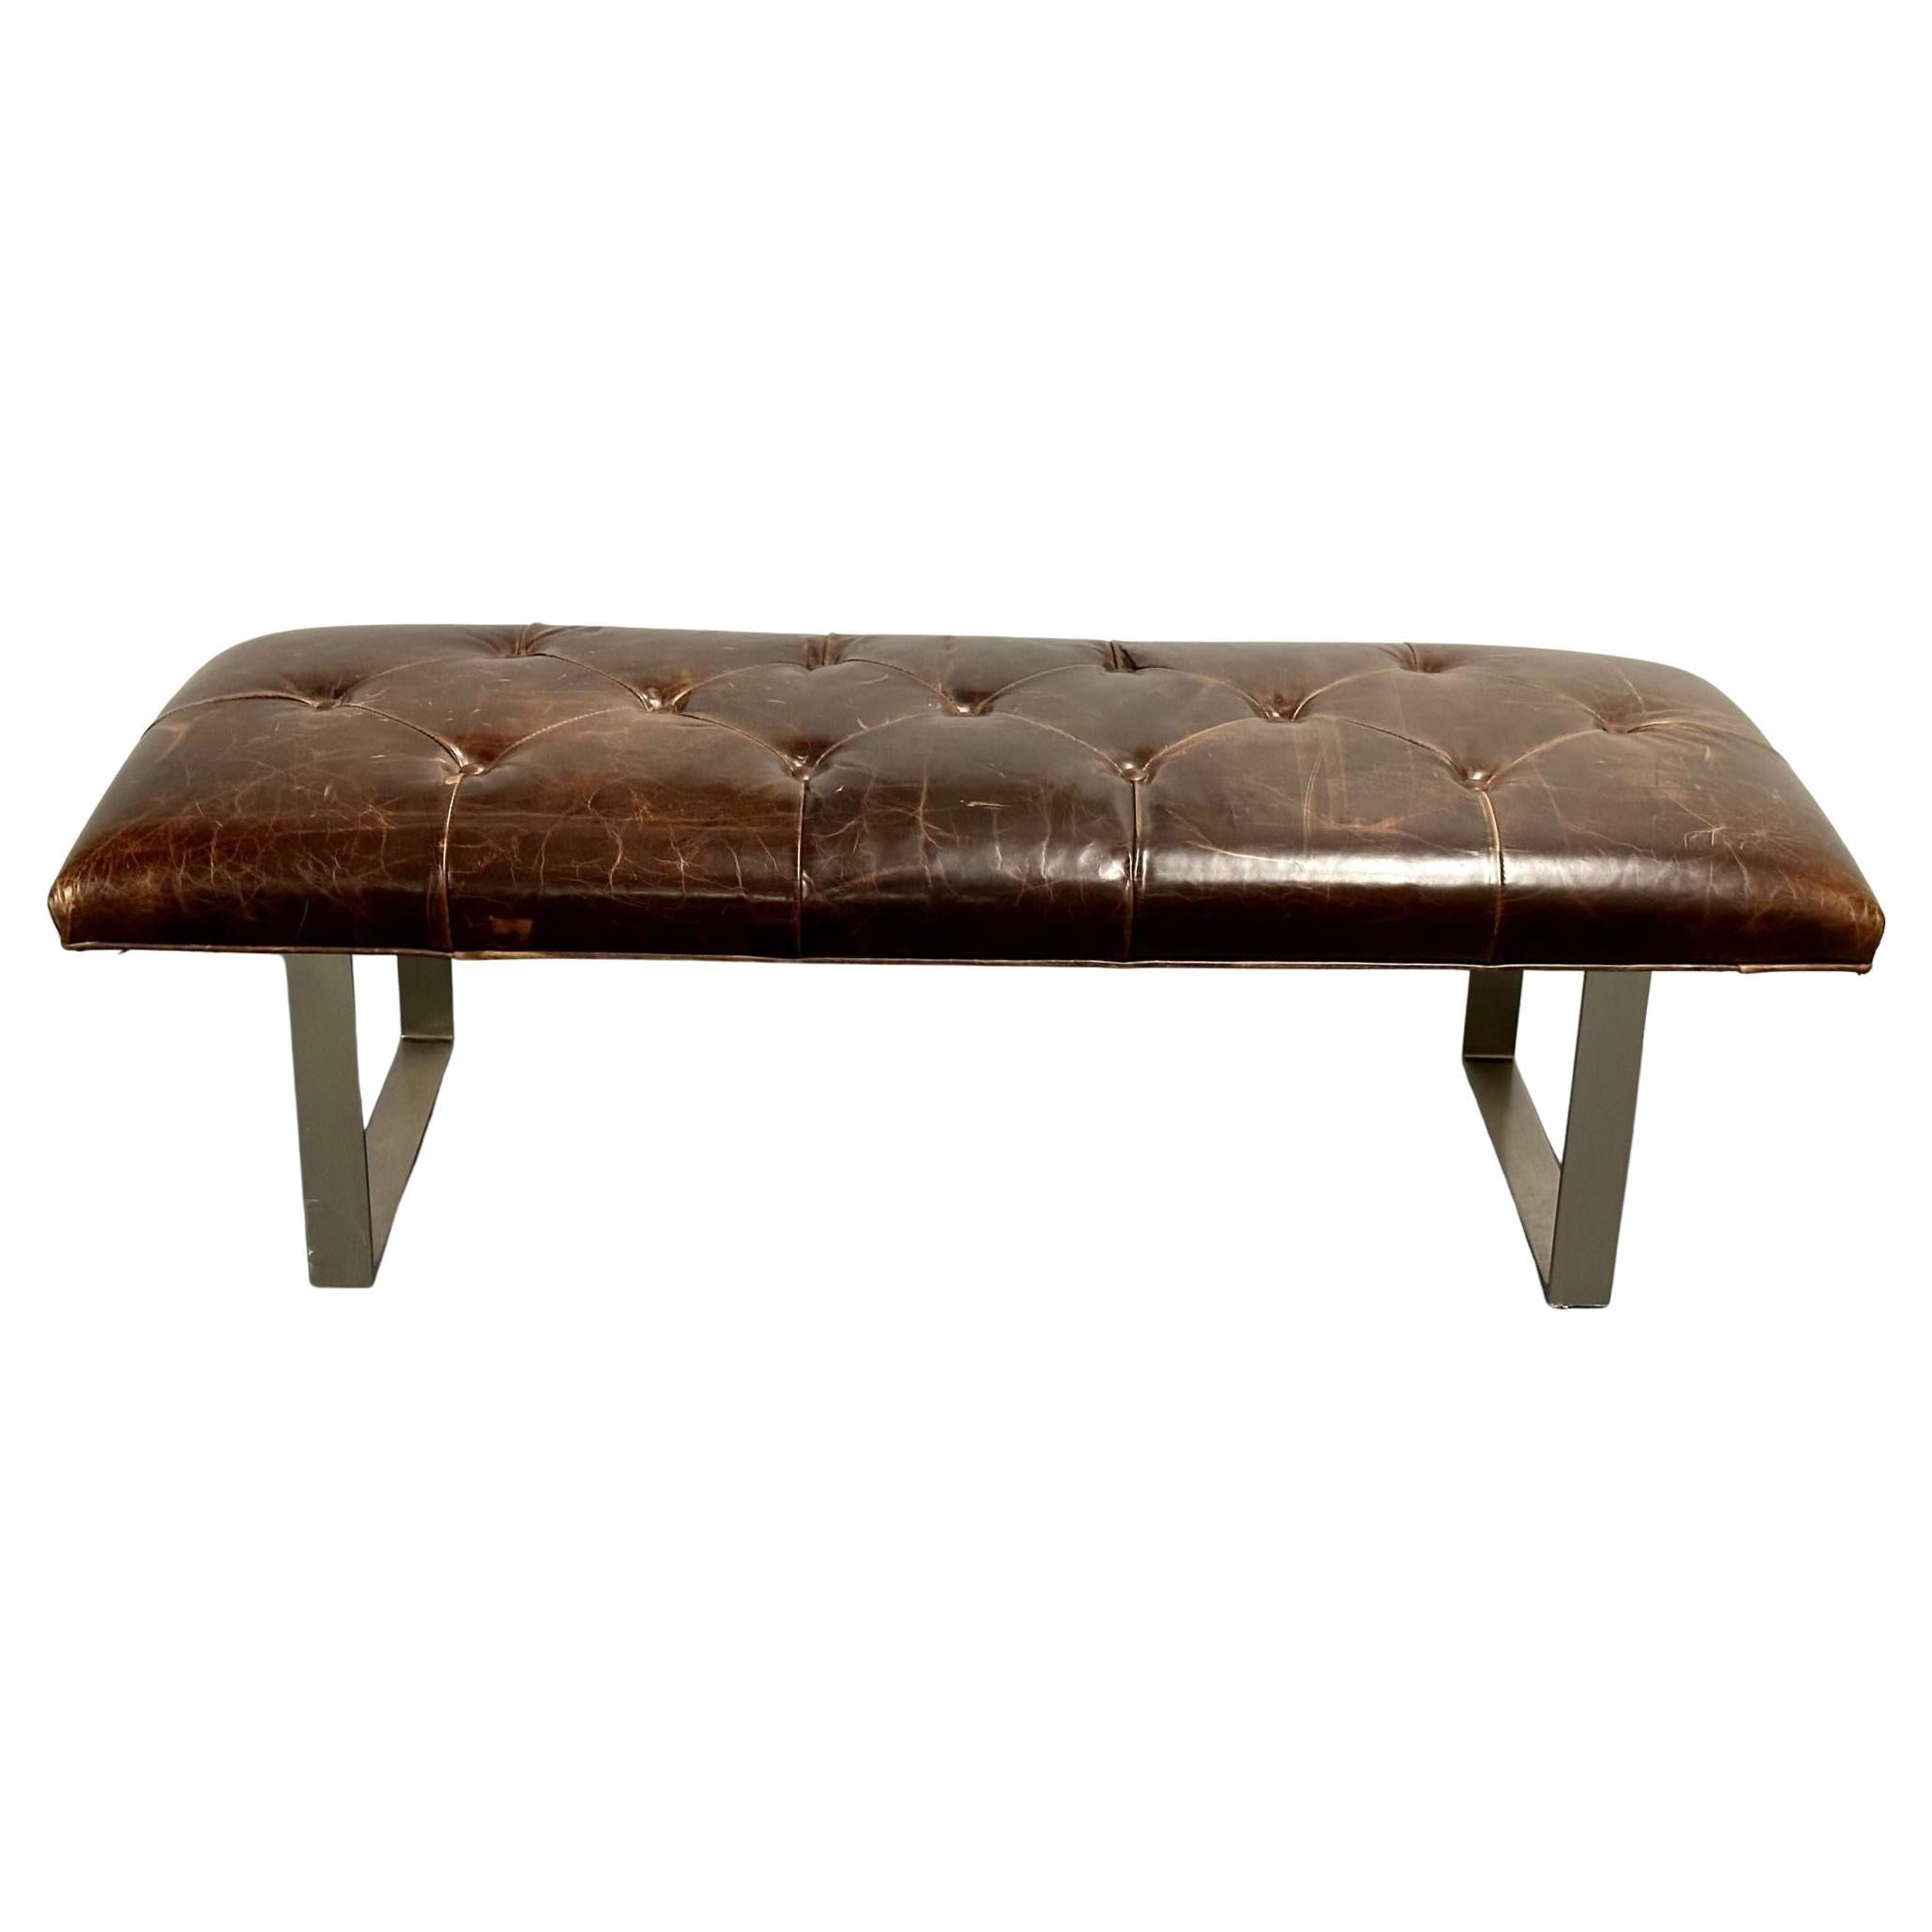 Modern Distressed Leather and Steel Window Bench, Footstool, Contemporary